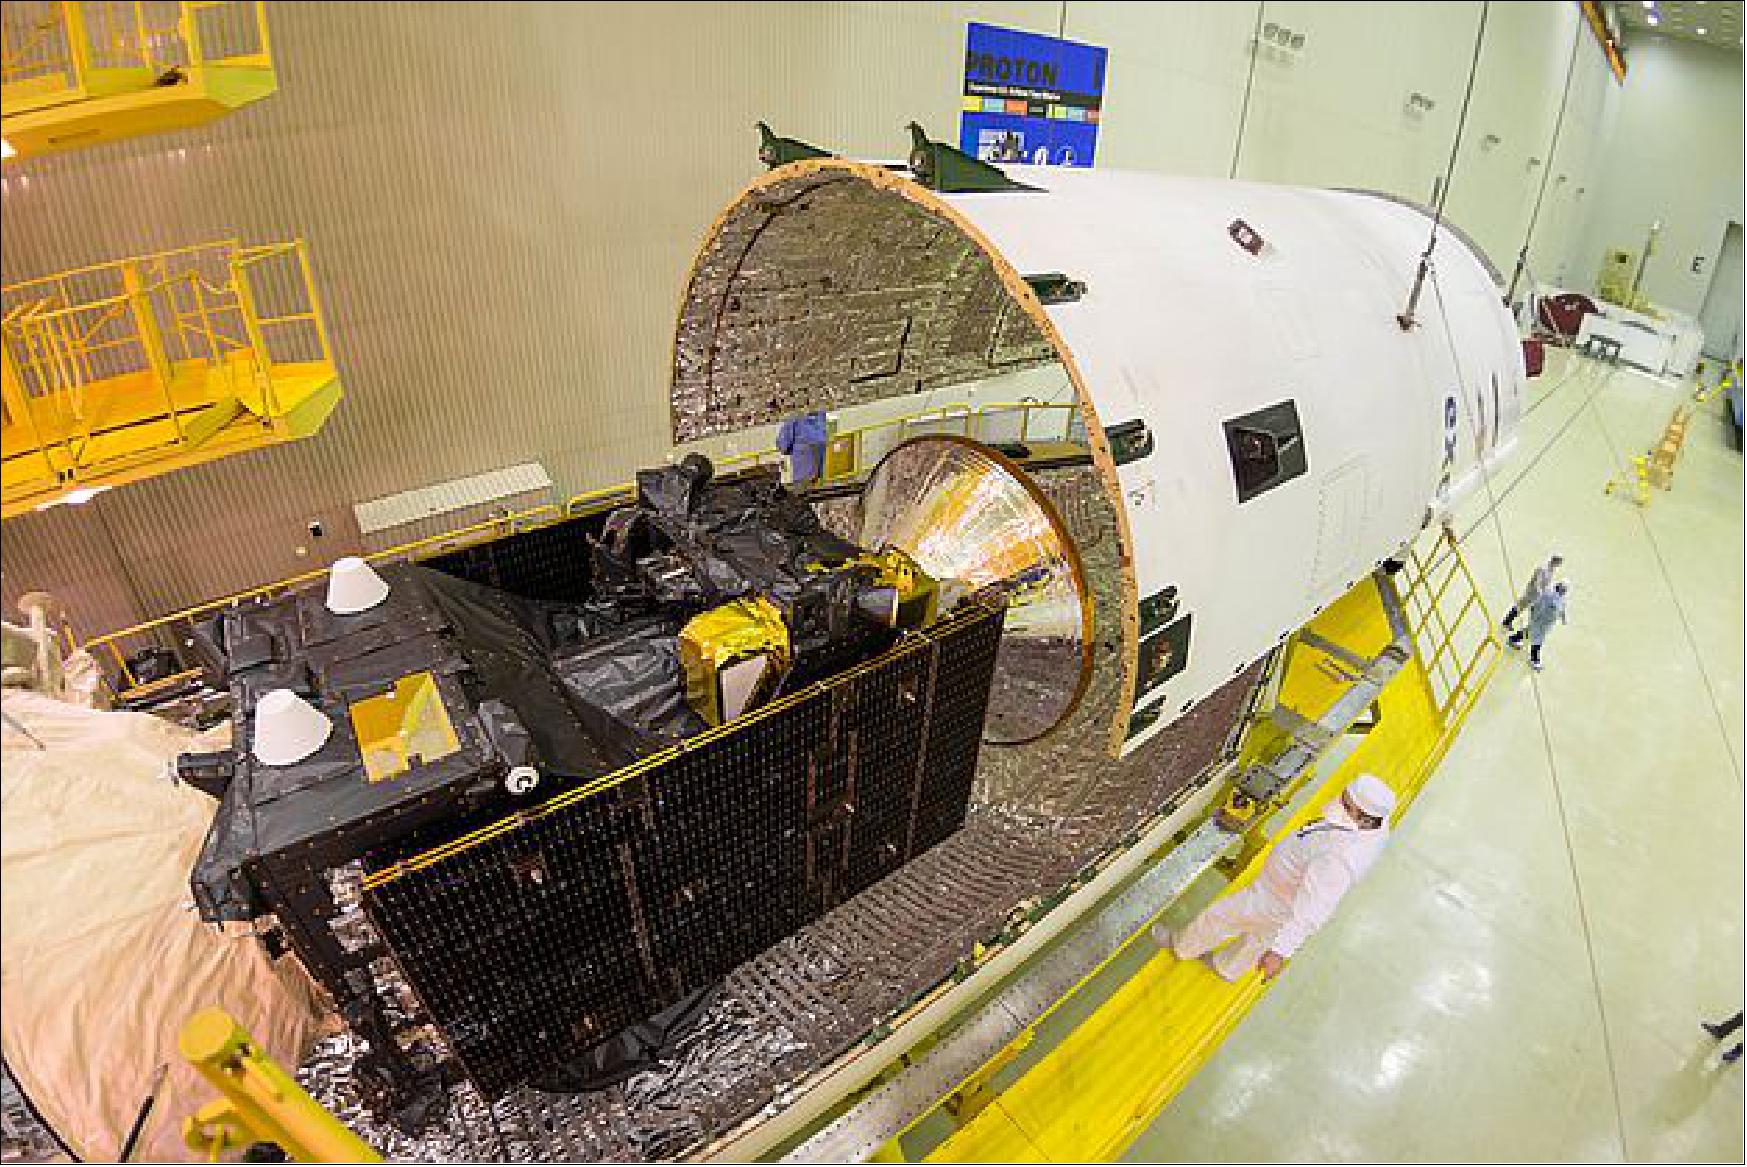 Figure 6: The ExoMars 2016 spacecraft, comprised of the Trace Gas Orbiter and Schiaparelli, are now sealed inside the rocket fairing (image credit: ESA, B. Bethge) 15) 16)